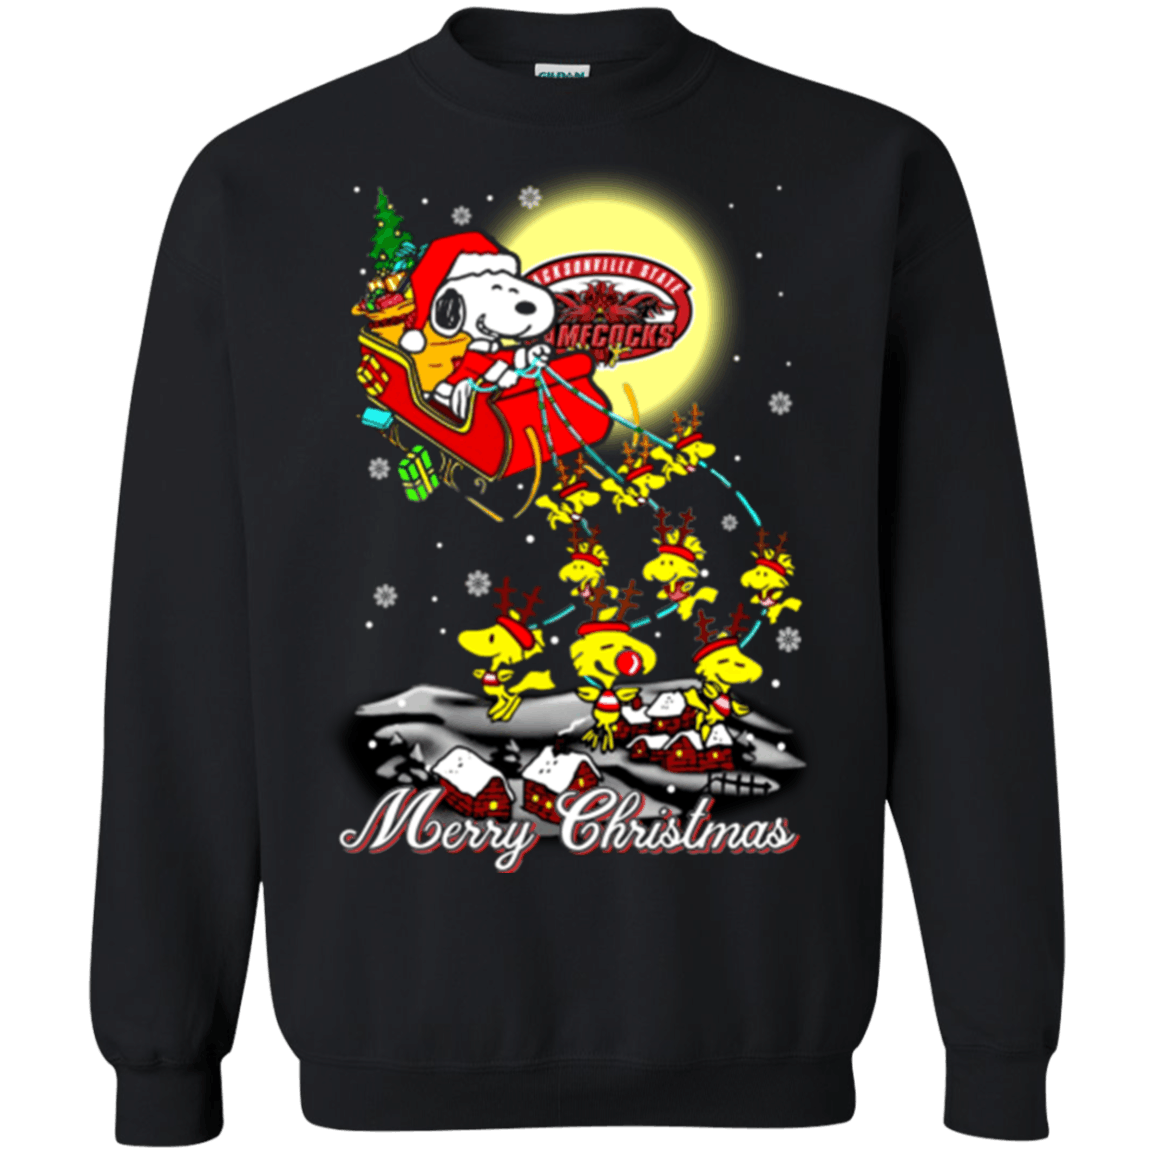 Amazing Jacksonville State Gamecocks Snoopy Ugly Christmas Sweaters Santa Claus With Sleigh Sweatshirts